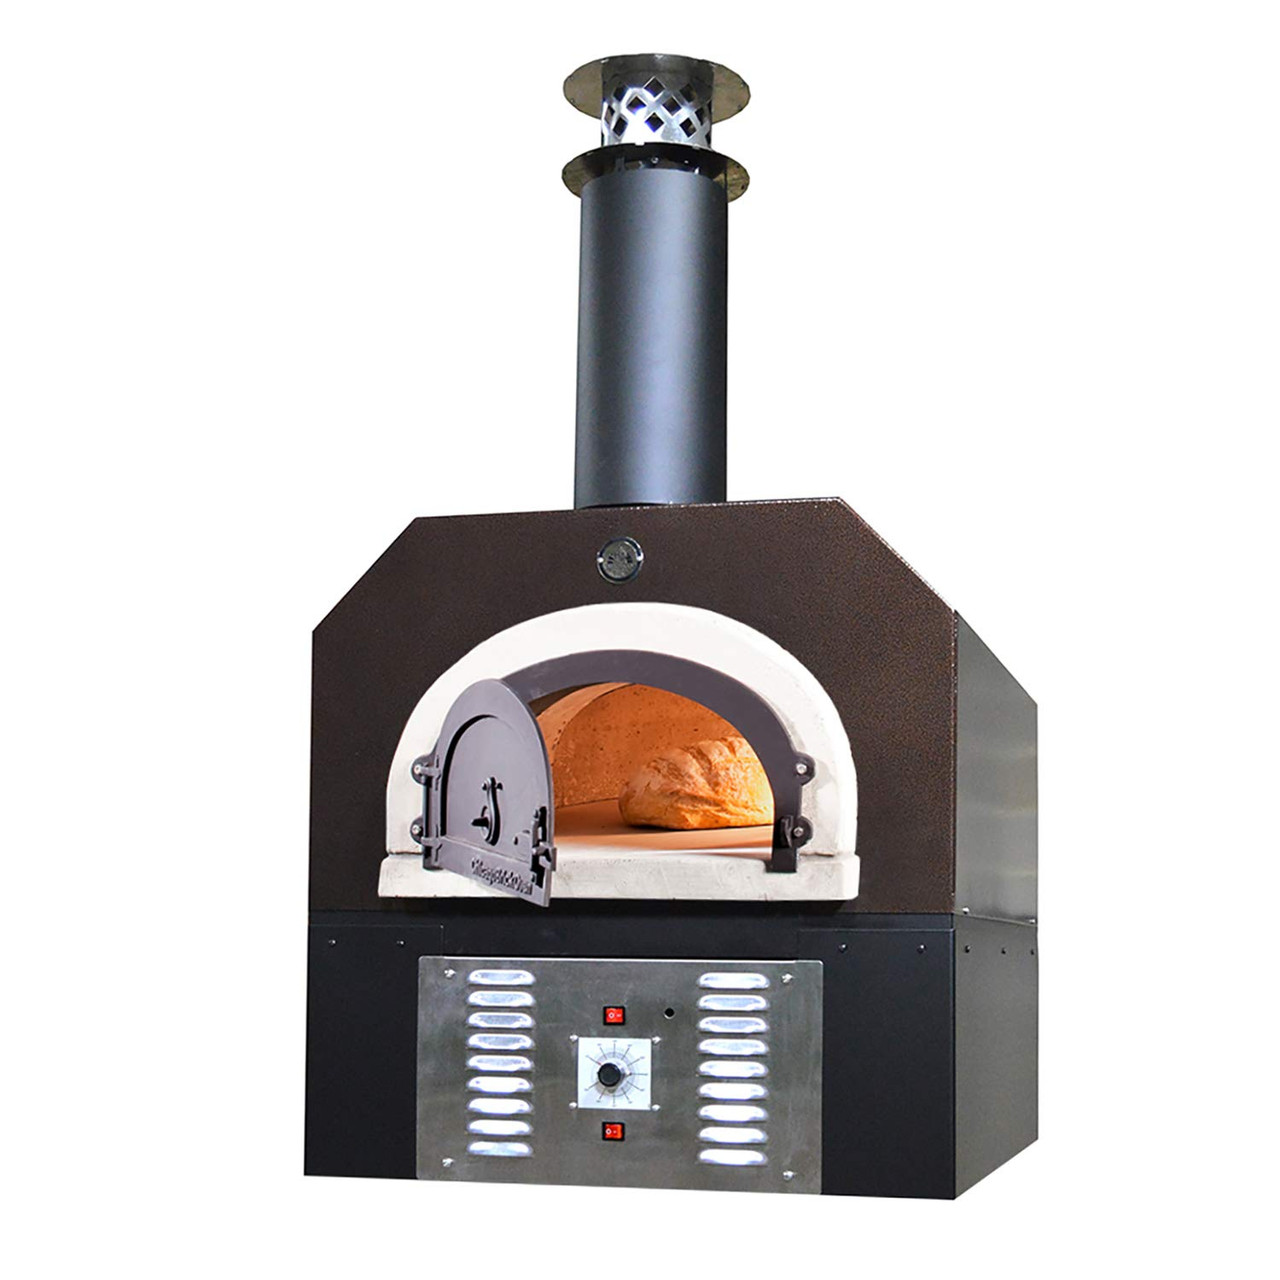 Outside Clay Oven Gas Oven Clay pizza oven Garden Supplies